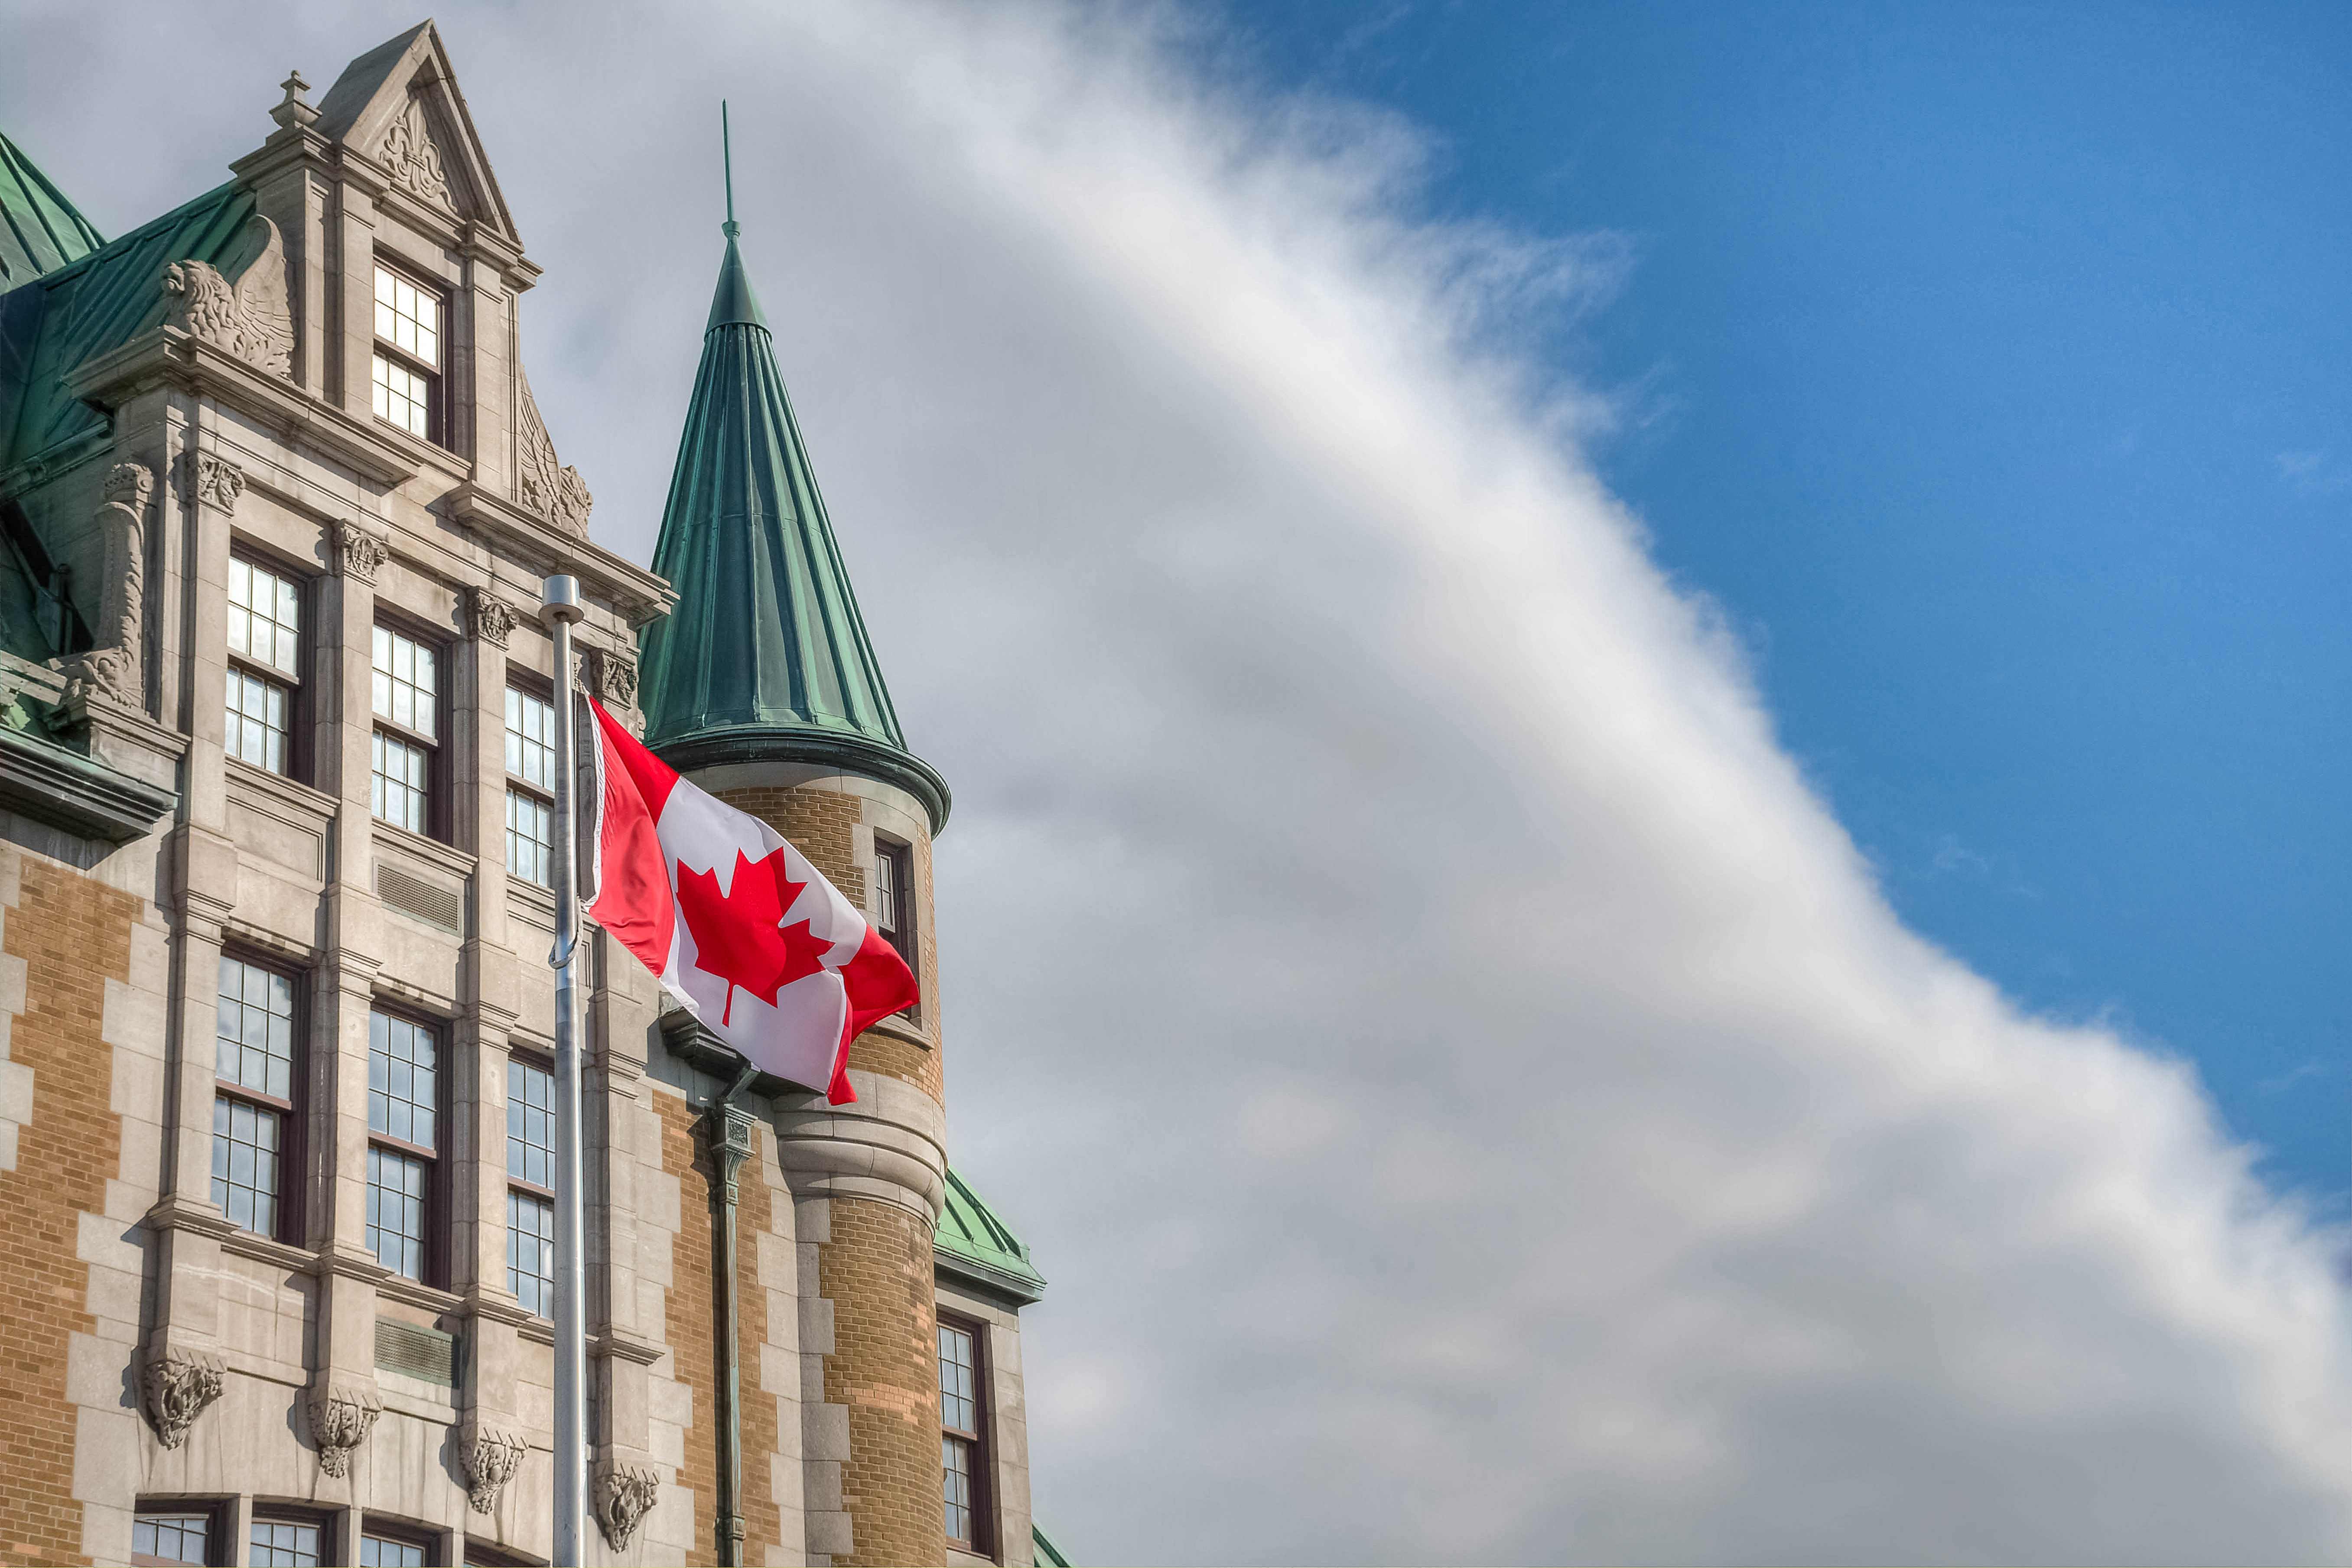 Building with the Canadian flag, as a symbol of immigration to Canada under the provincial program